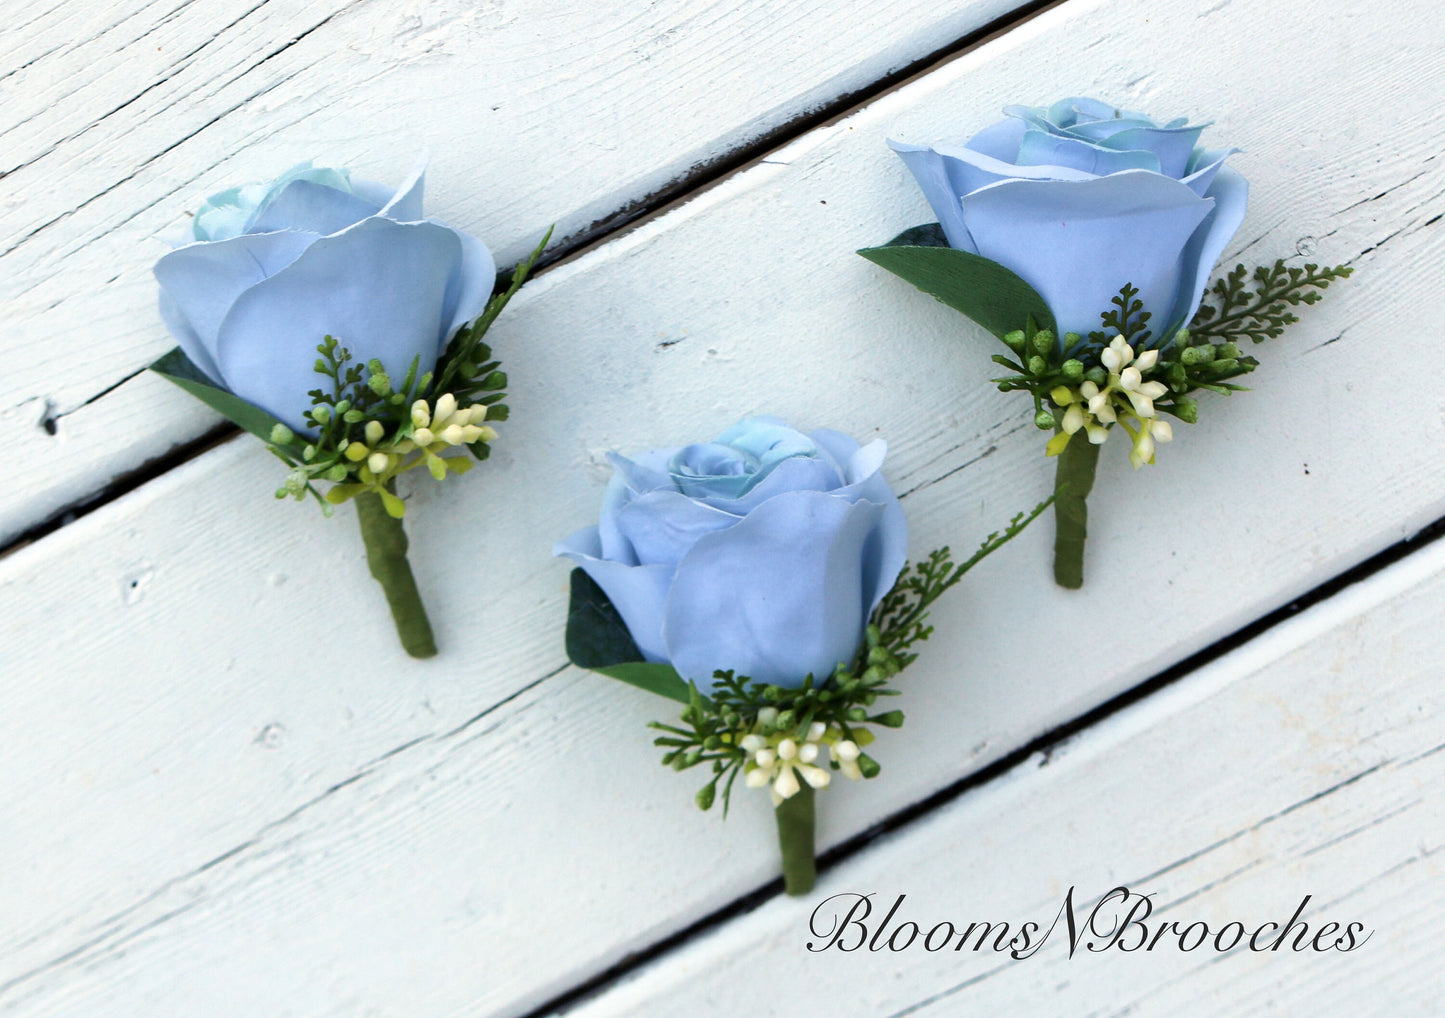 Boho Wedding Bouquet in Navy Dusty Blue and Ivory, Faux Bridal and Bridesmaids bouquets, Artificial Wedding Flowers Roses, eucalyptus